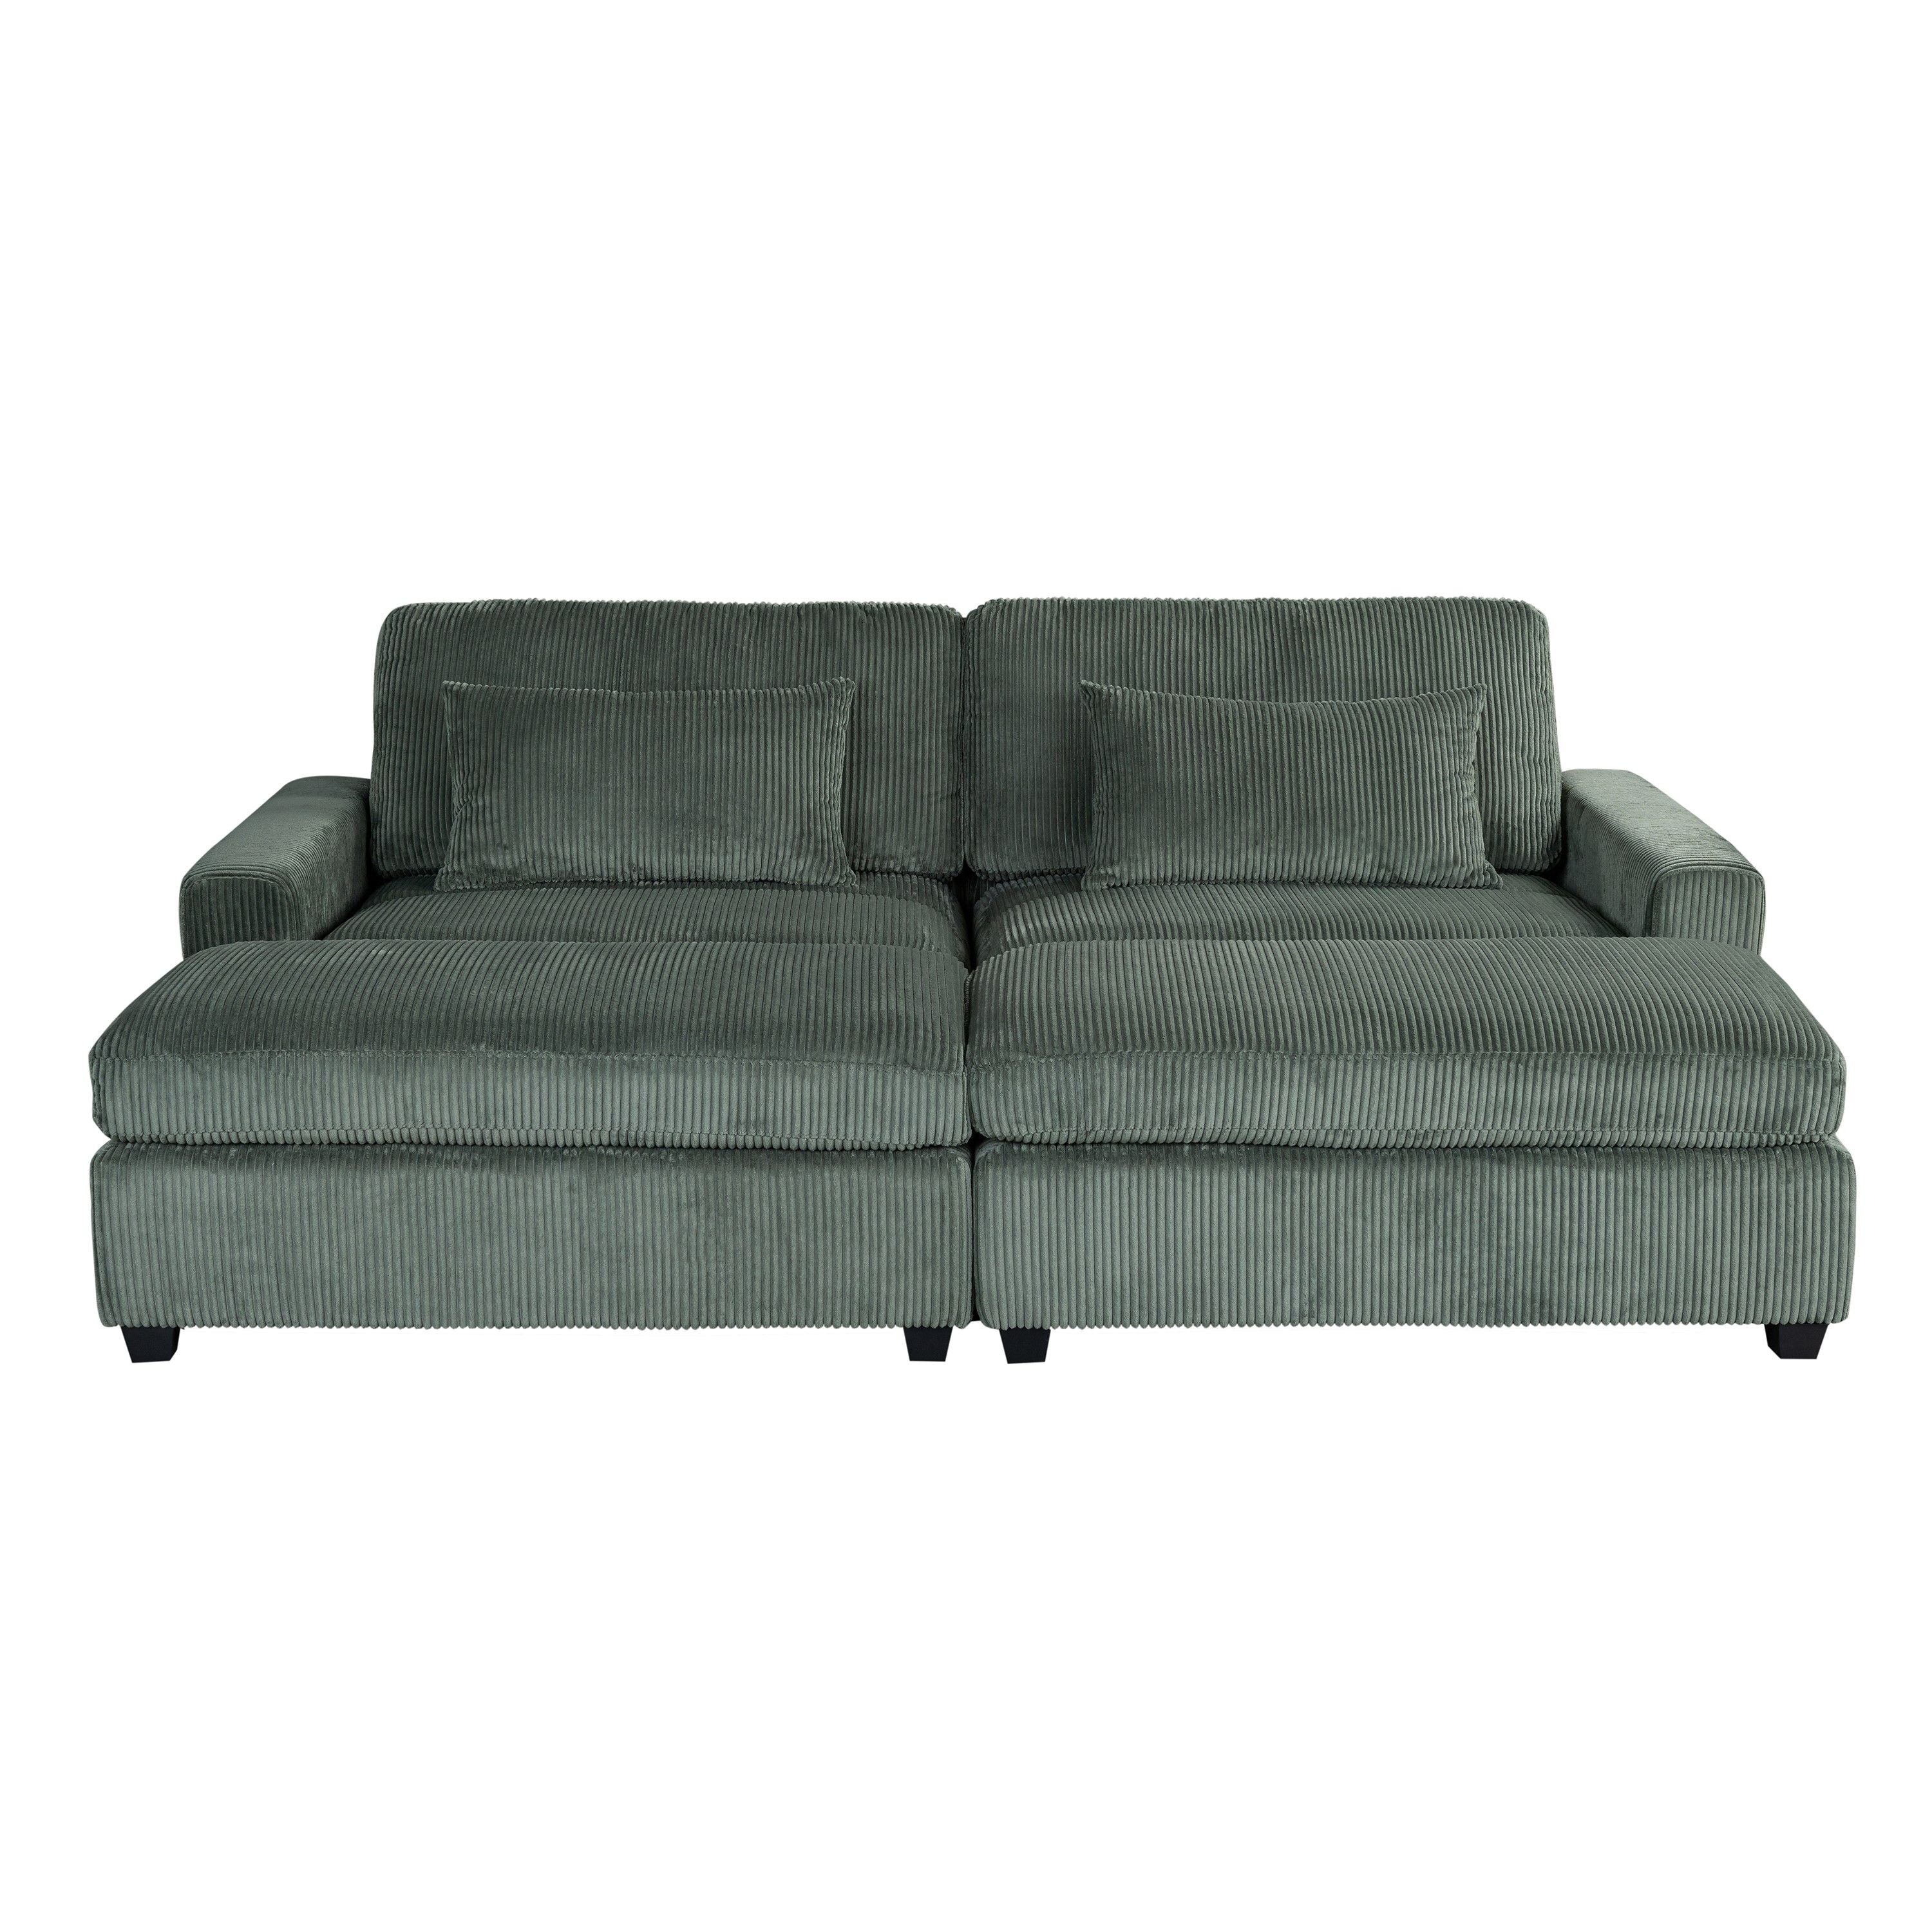 U_Style 90" Square Arm Sofa With Removable Back Cushions And 2 Pillows, Couch For Living Room, Office, Apartment - Green